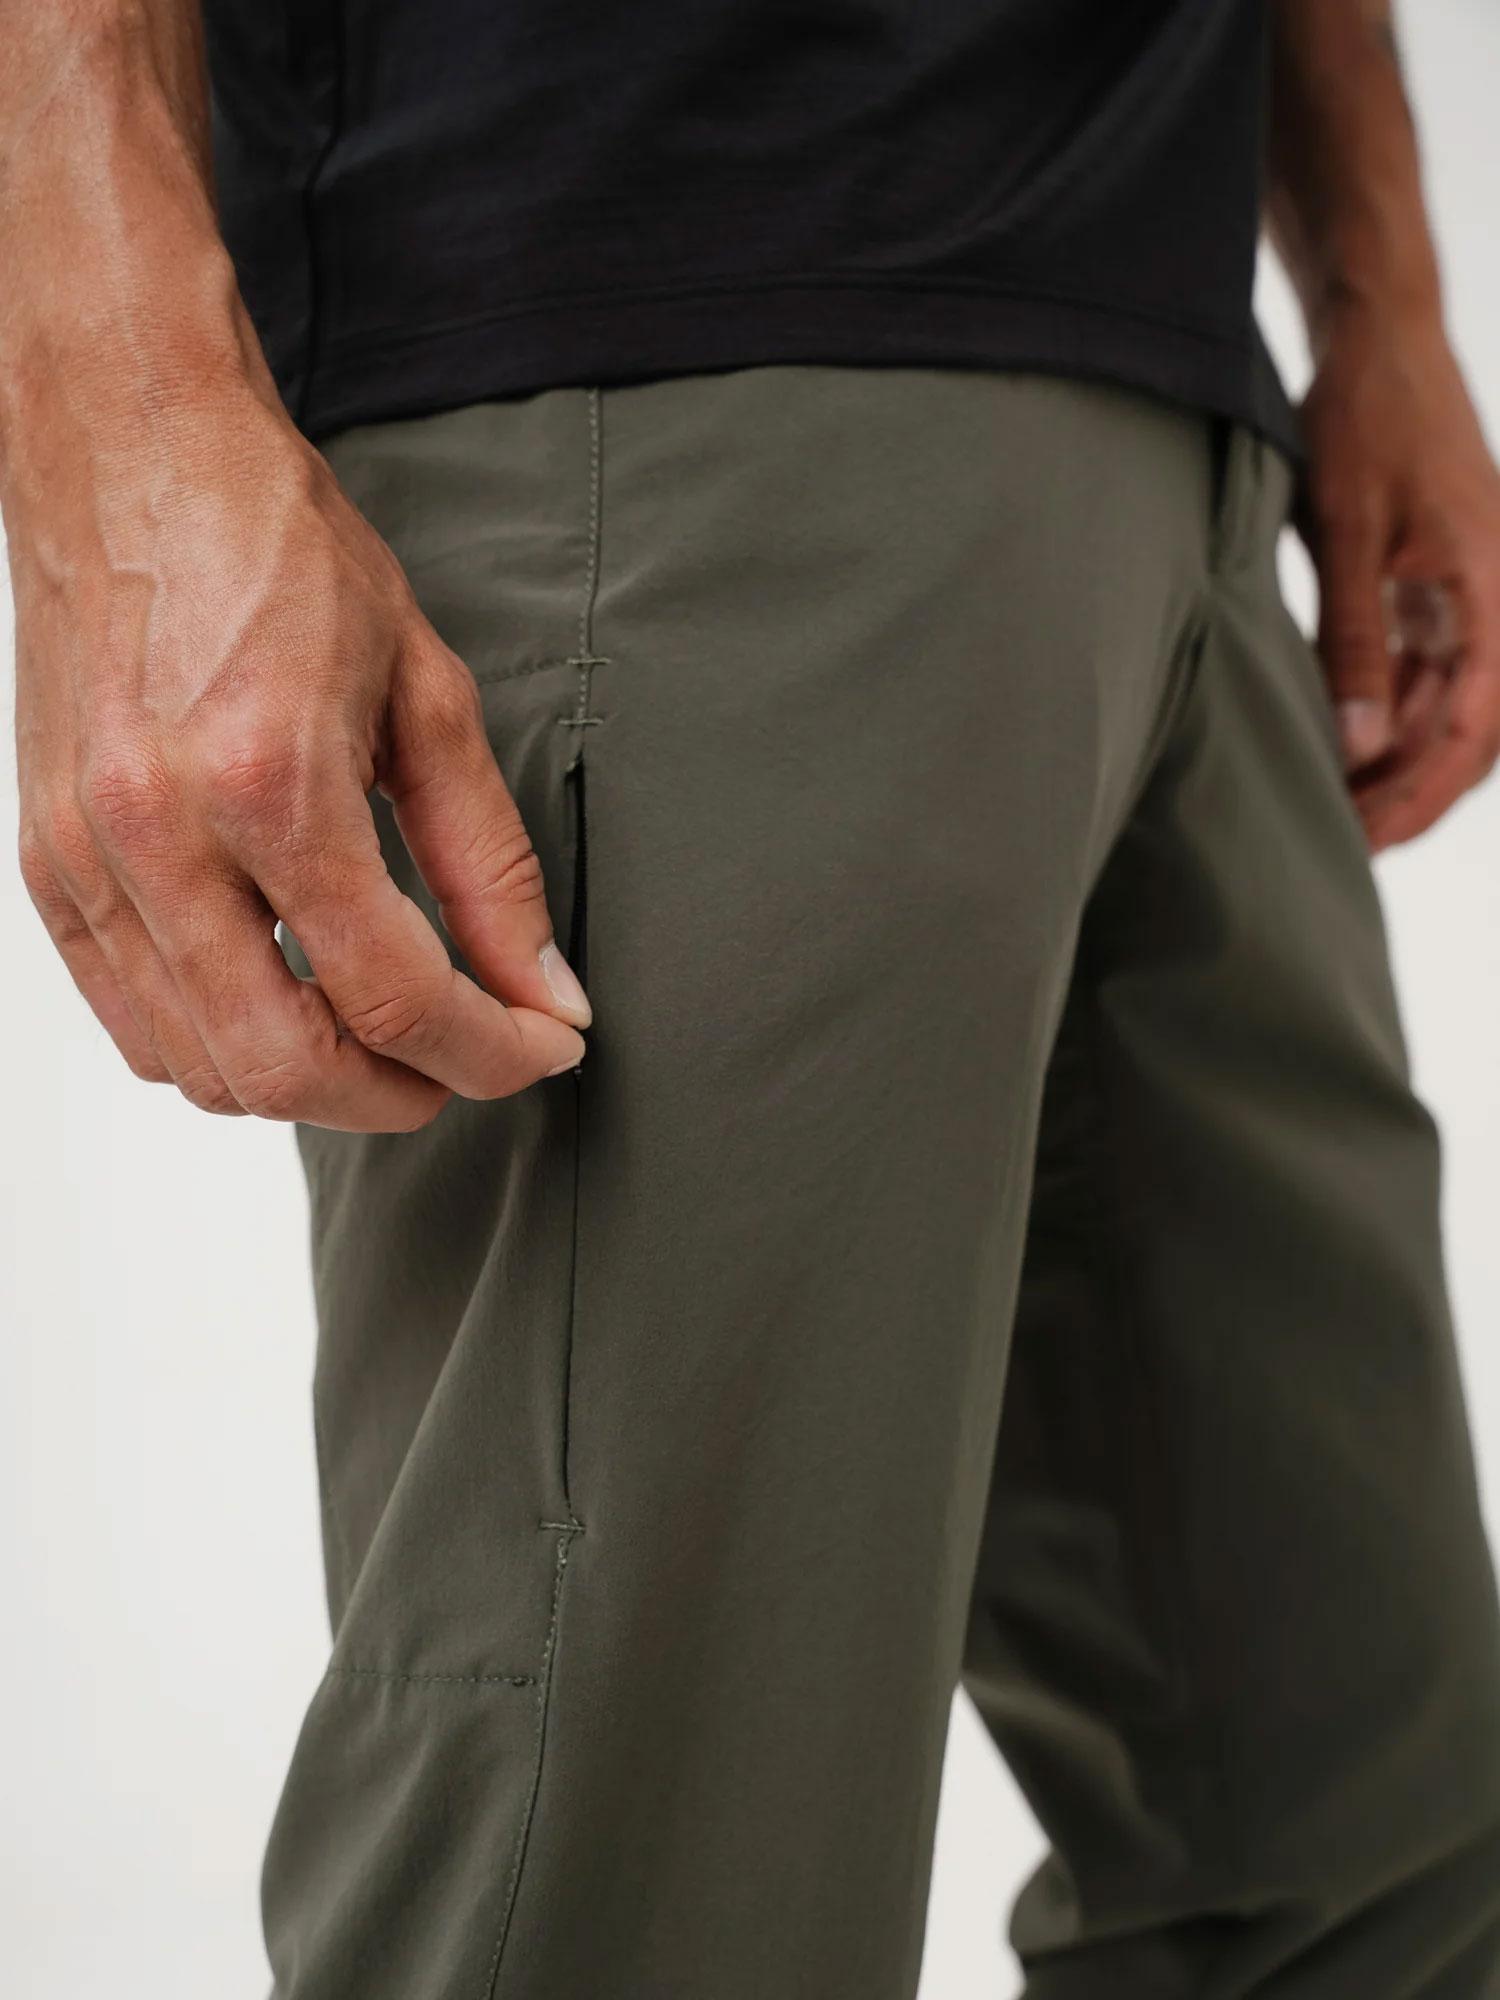 Introducing the Mission Workshop Division Performance Chino Pant ...